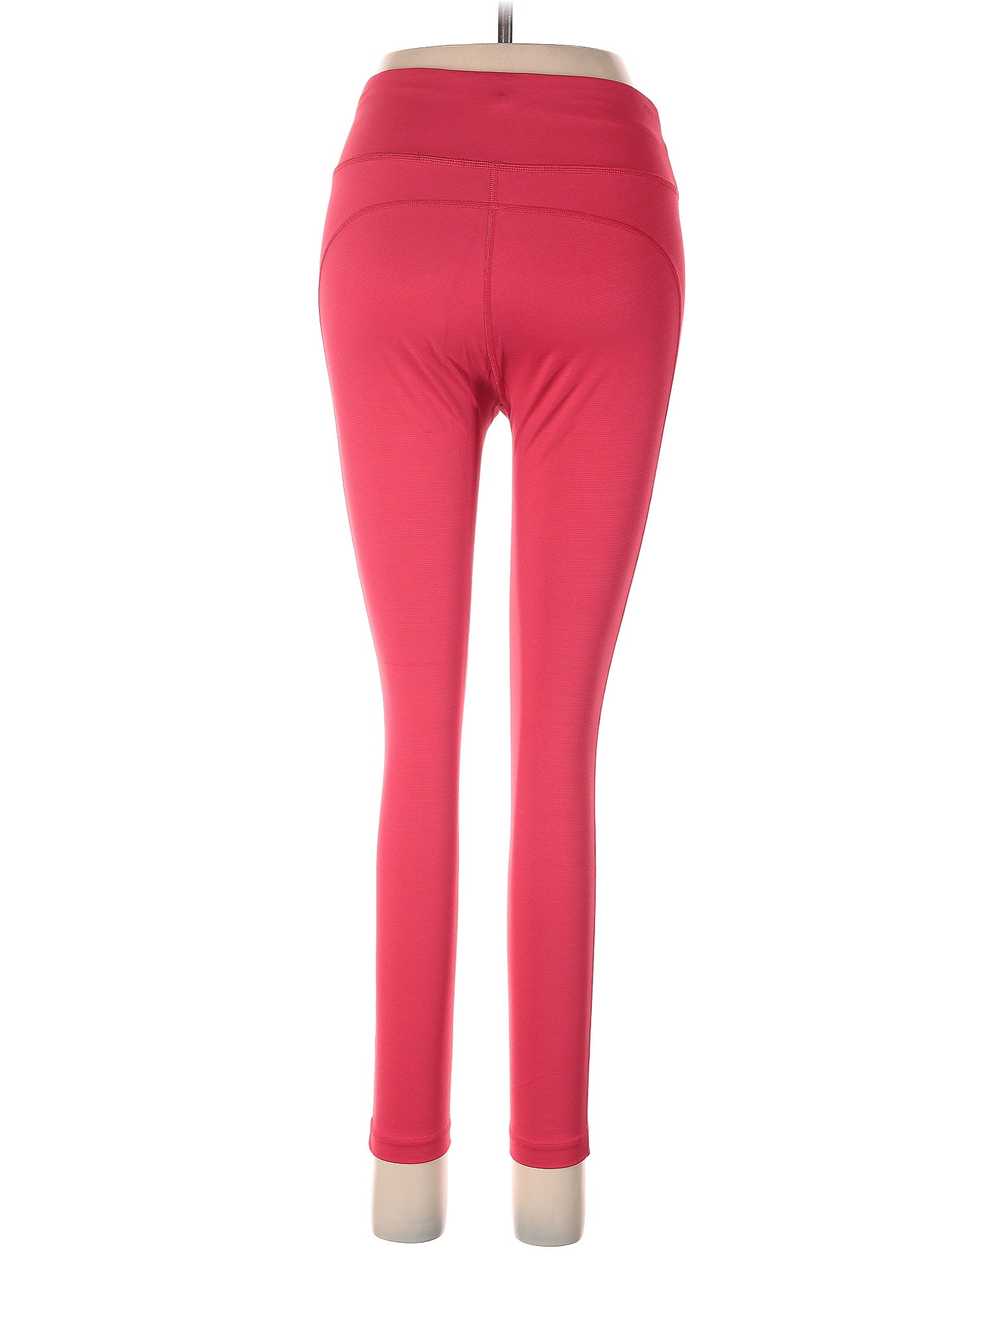 Outdoor Voices Women Red Active Pants M - image 2